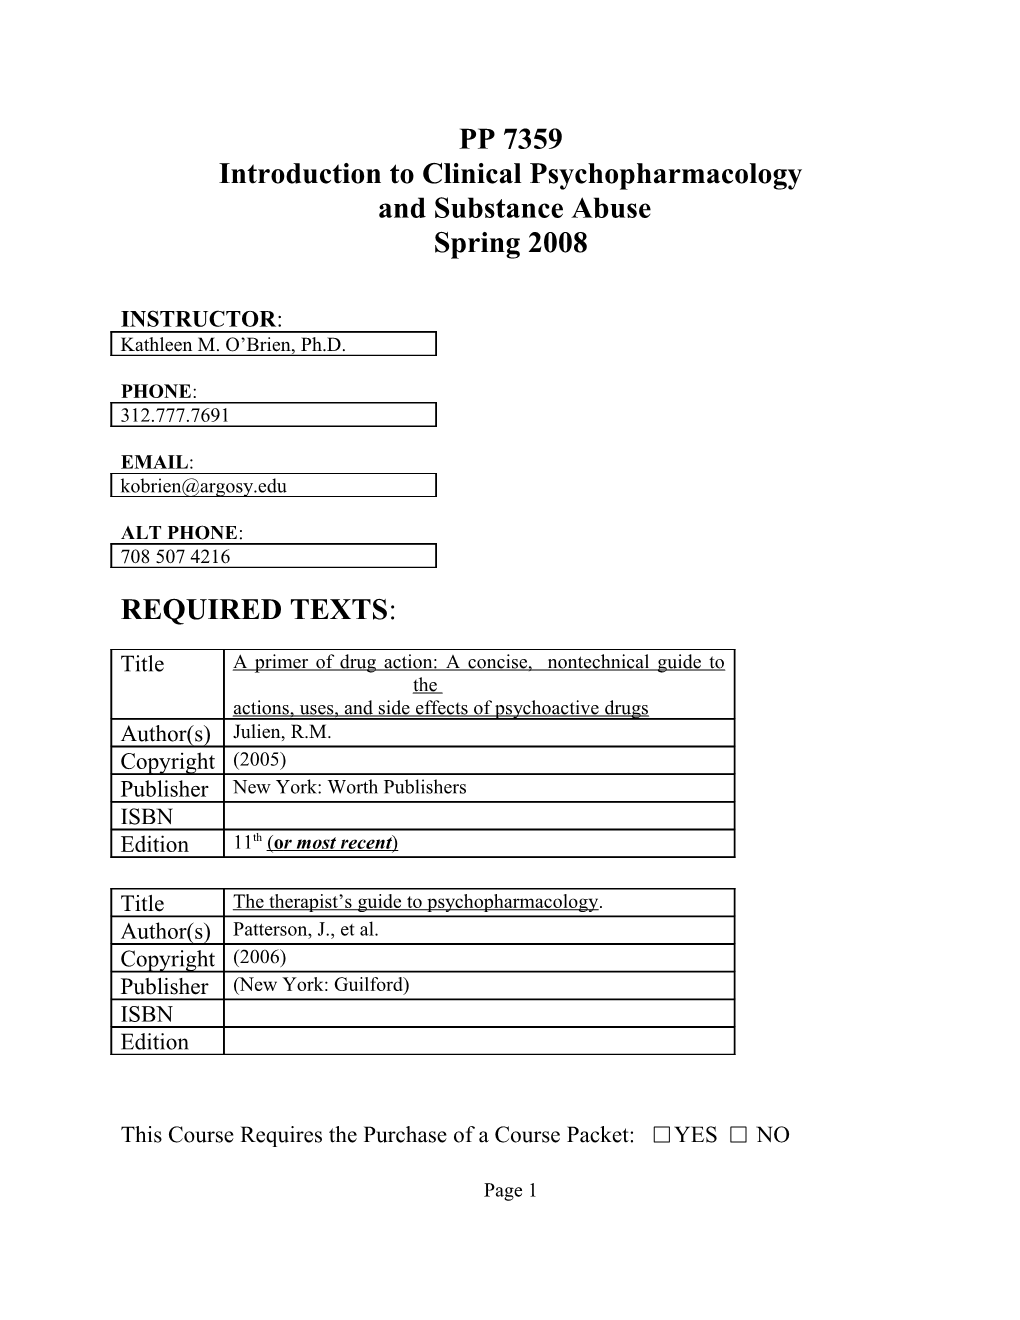 Introduction to Clinical Psychopharmacology